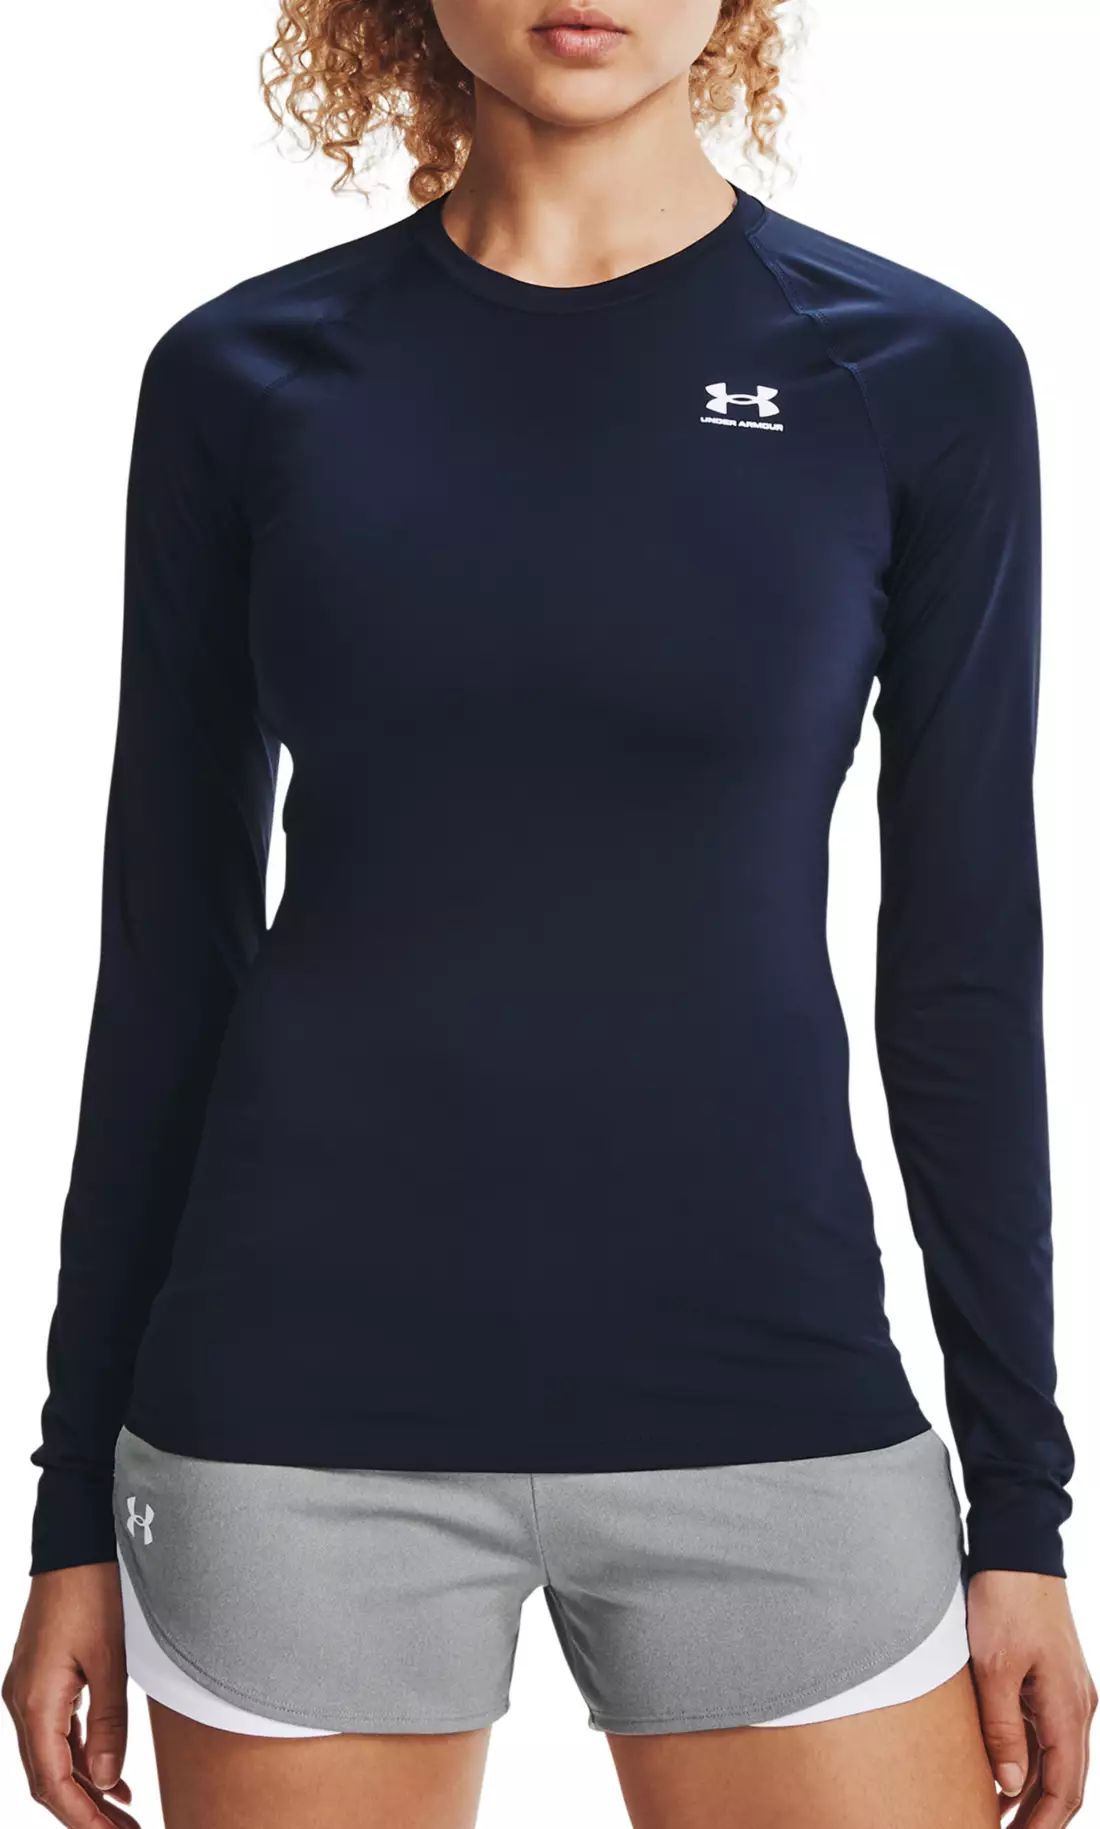 Under Armour Women's HeatGear Authentic Compression Long-Sleeve Shirt | Dick's Sporting Goods